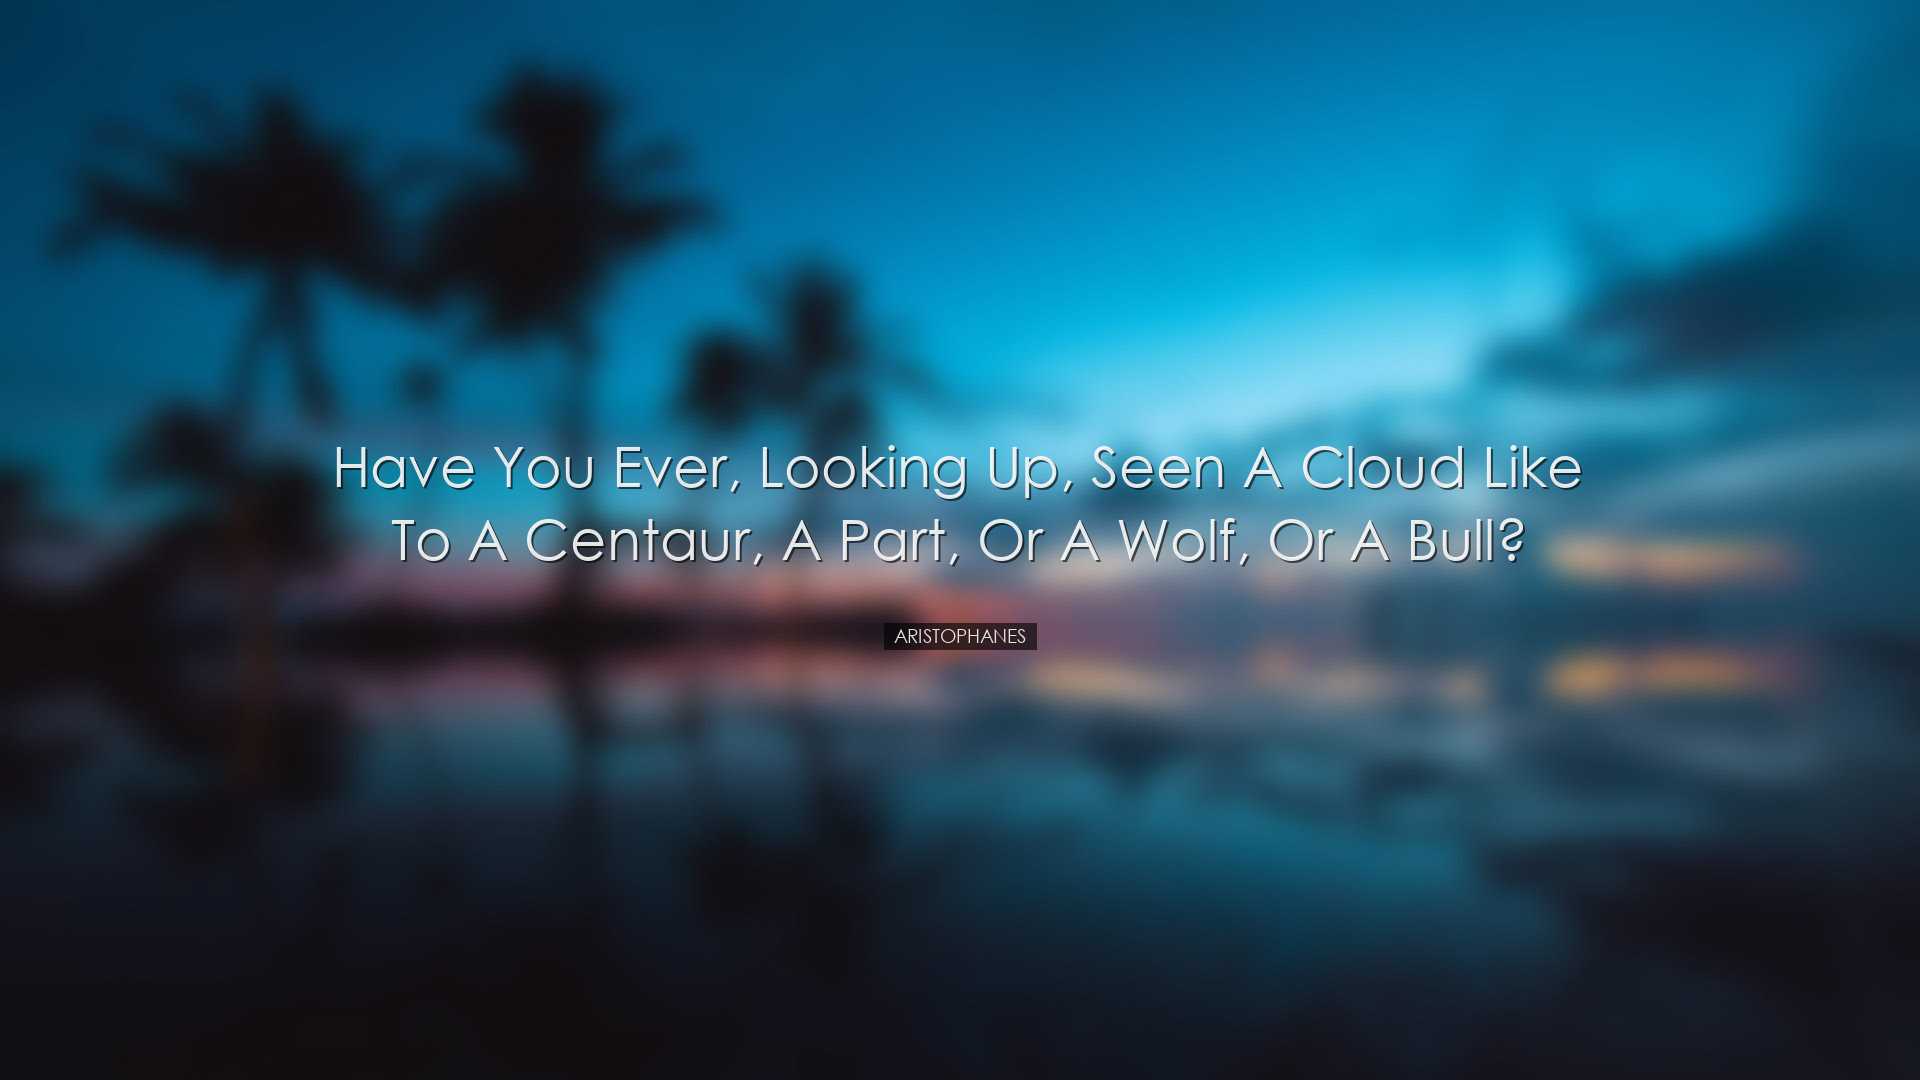 Have you ever, looking up, seen a cloud like to a Centaur, a Part,